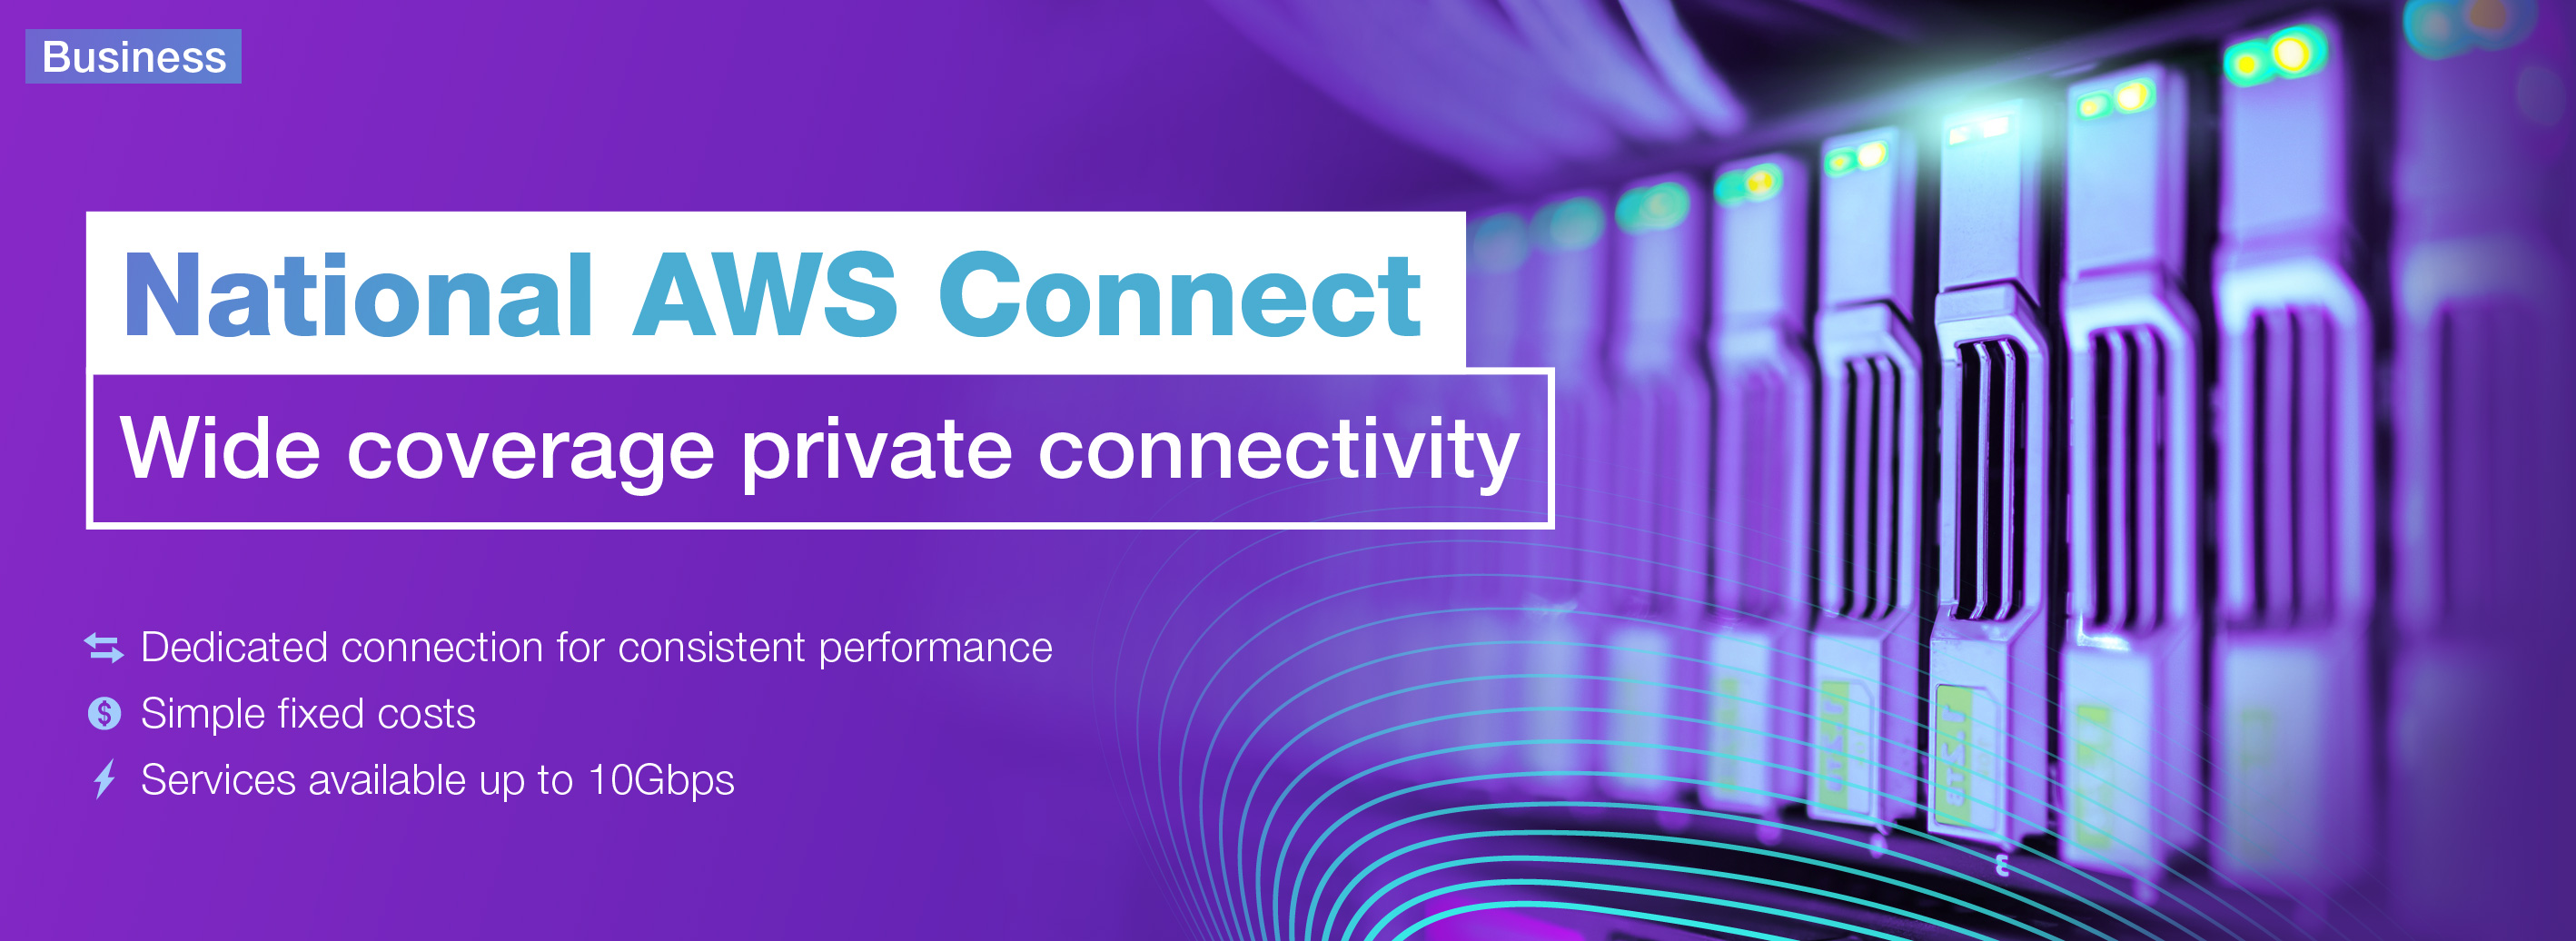 National AWS Connect: Private connectivity and extensive coverage